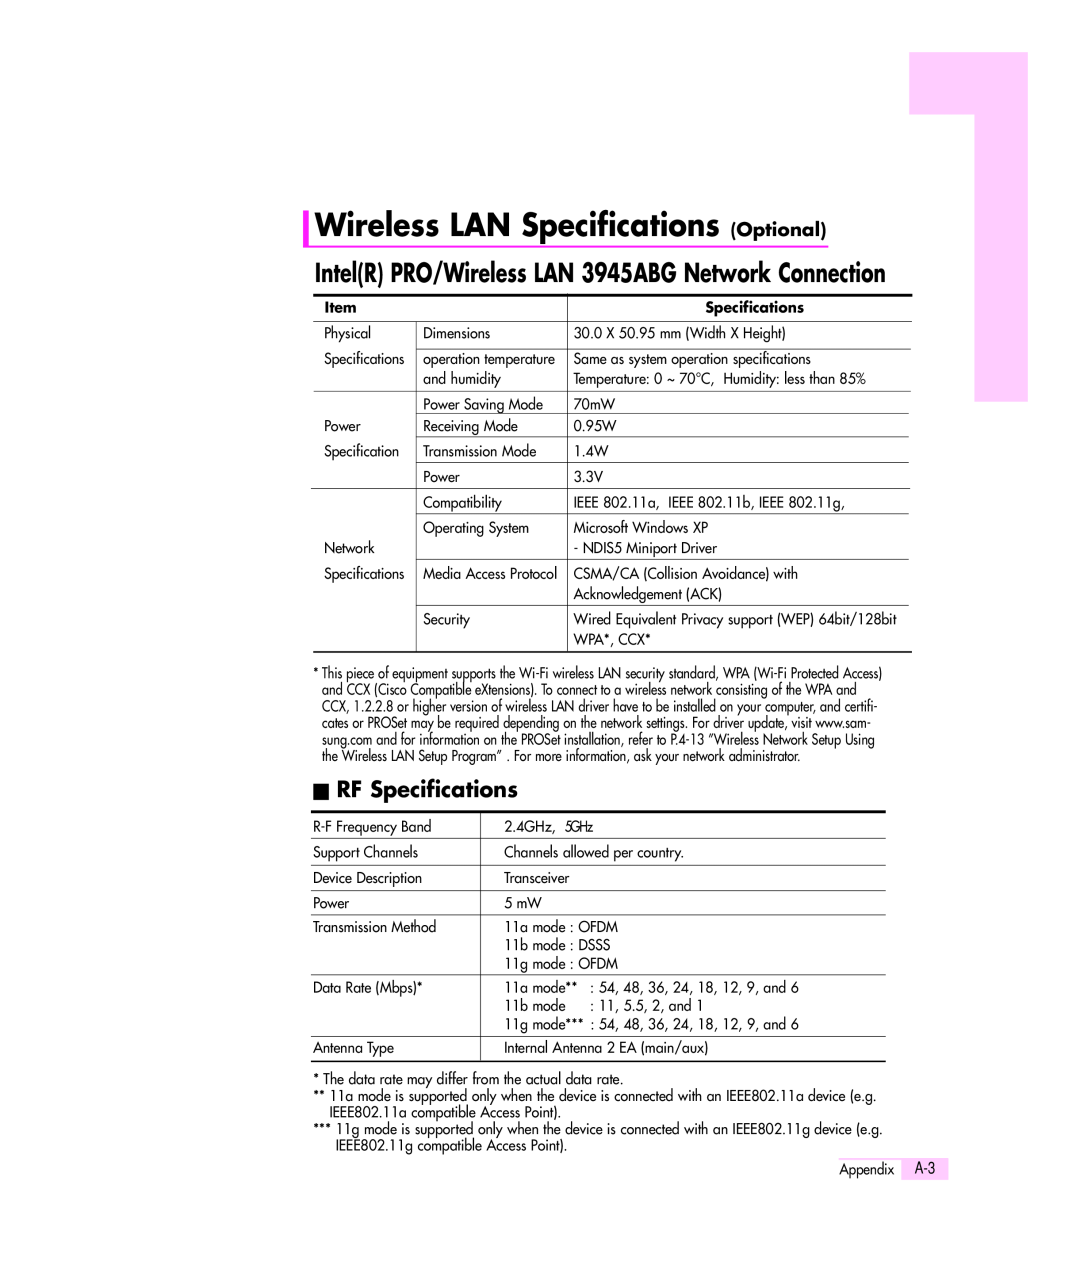 Samsung Q35 Wireless LAN Specifications Optional, RF Specifications, IntelR PRO/Wireless LAN 3945ABG Network Connection 